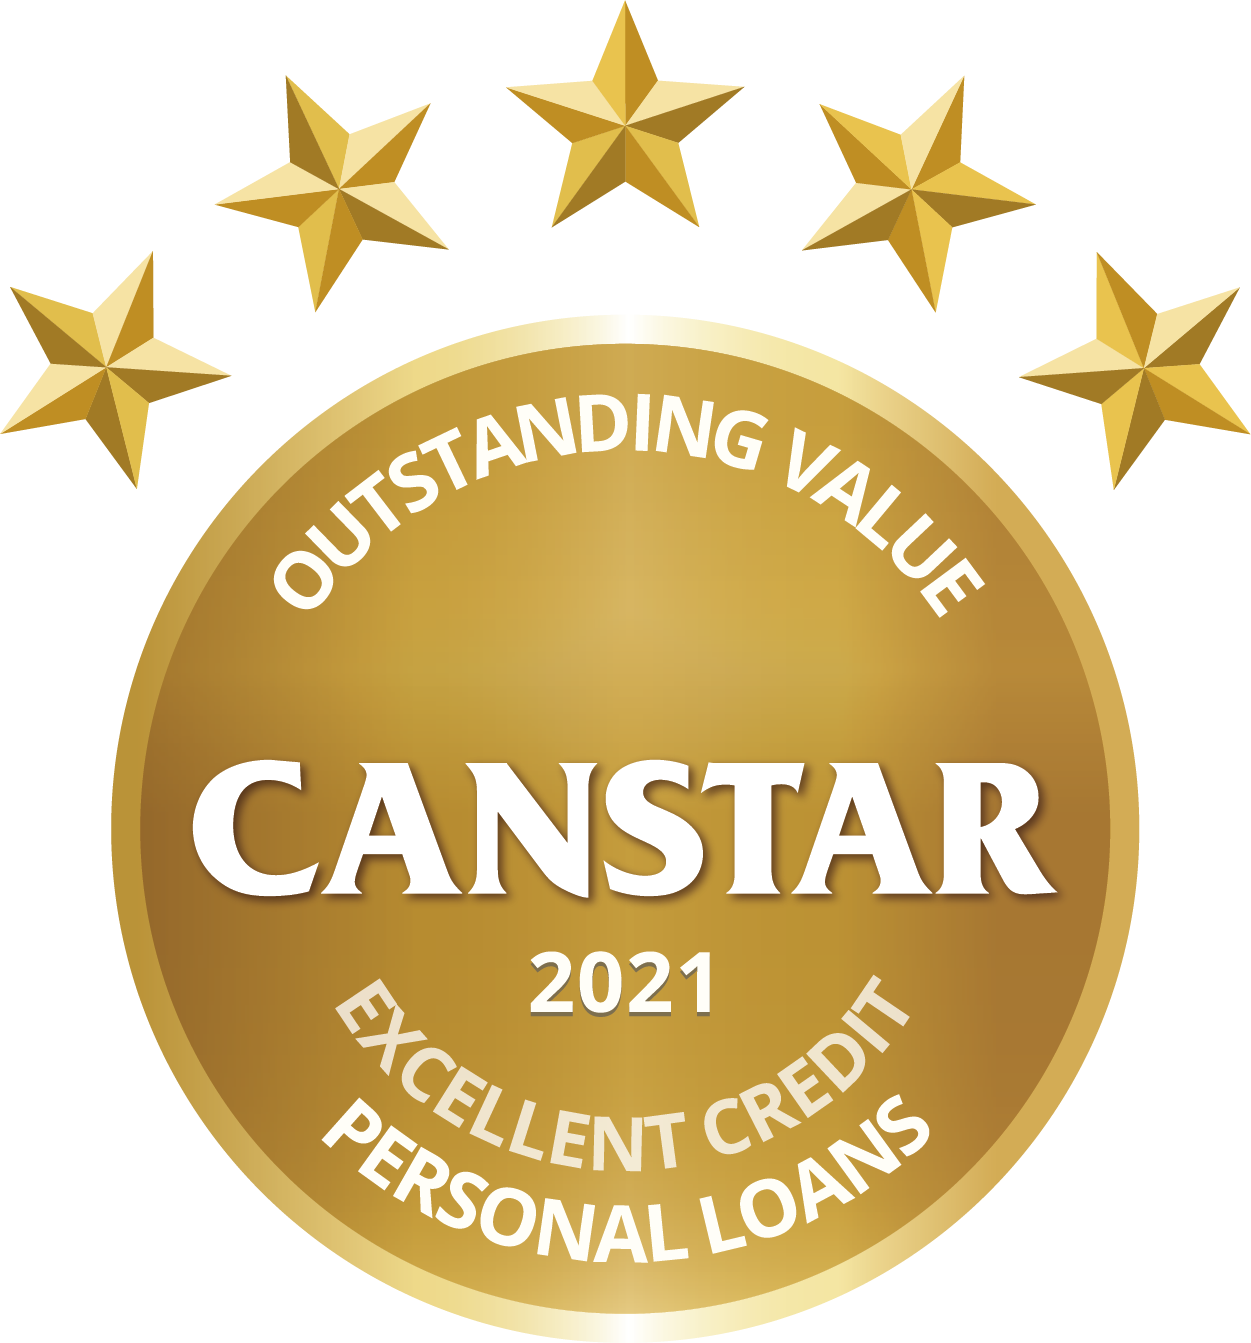 CANSTAR 2021 - Outstanding Value - Excellent Credit Personal Loans OL.png